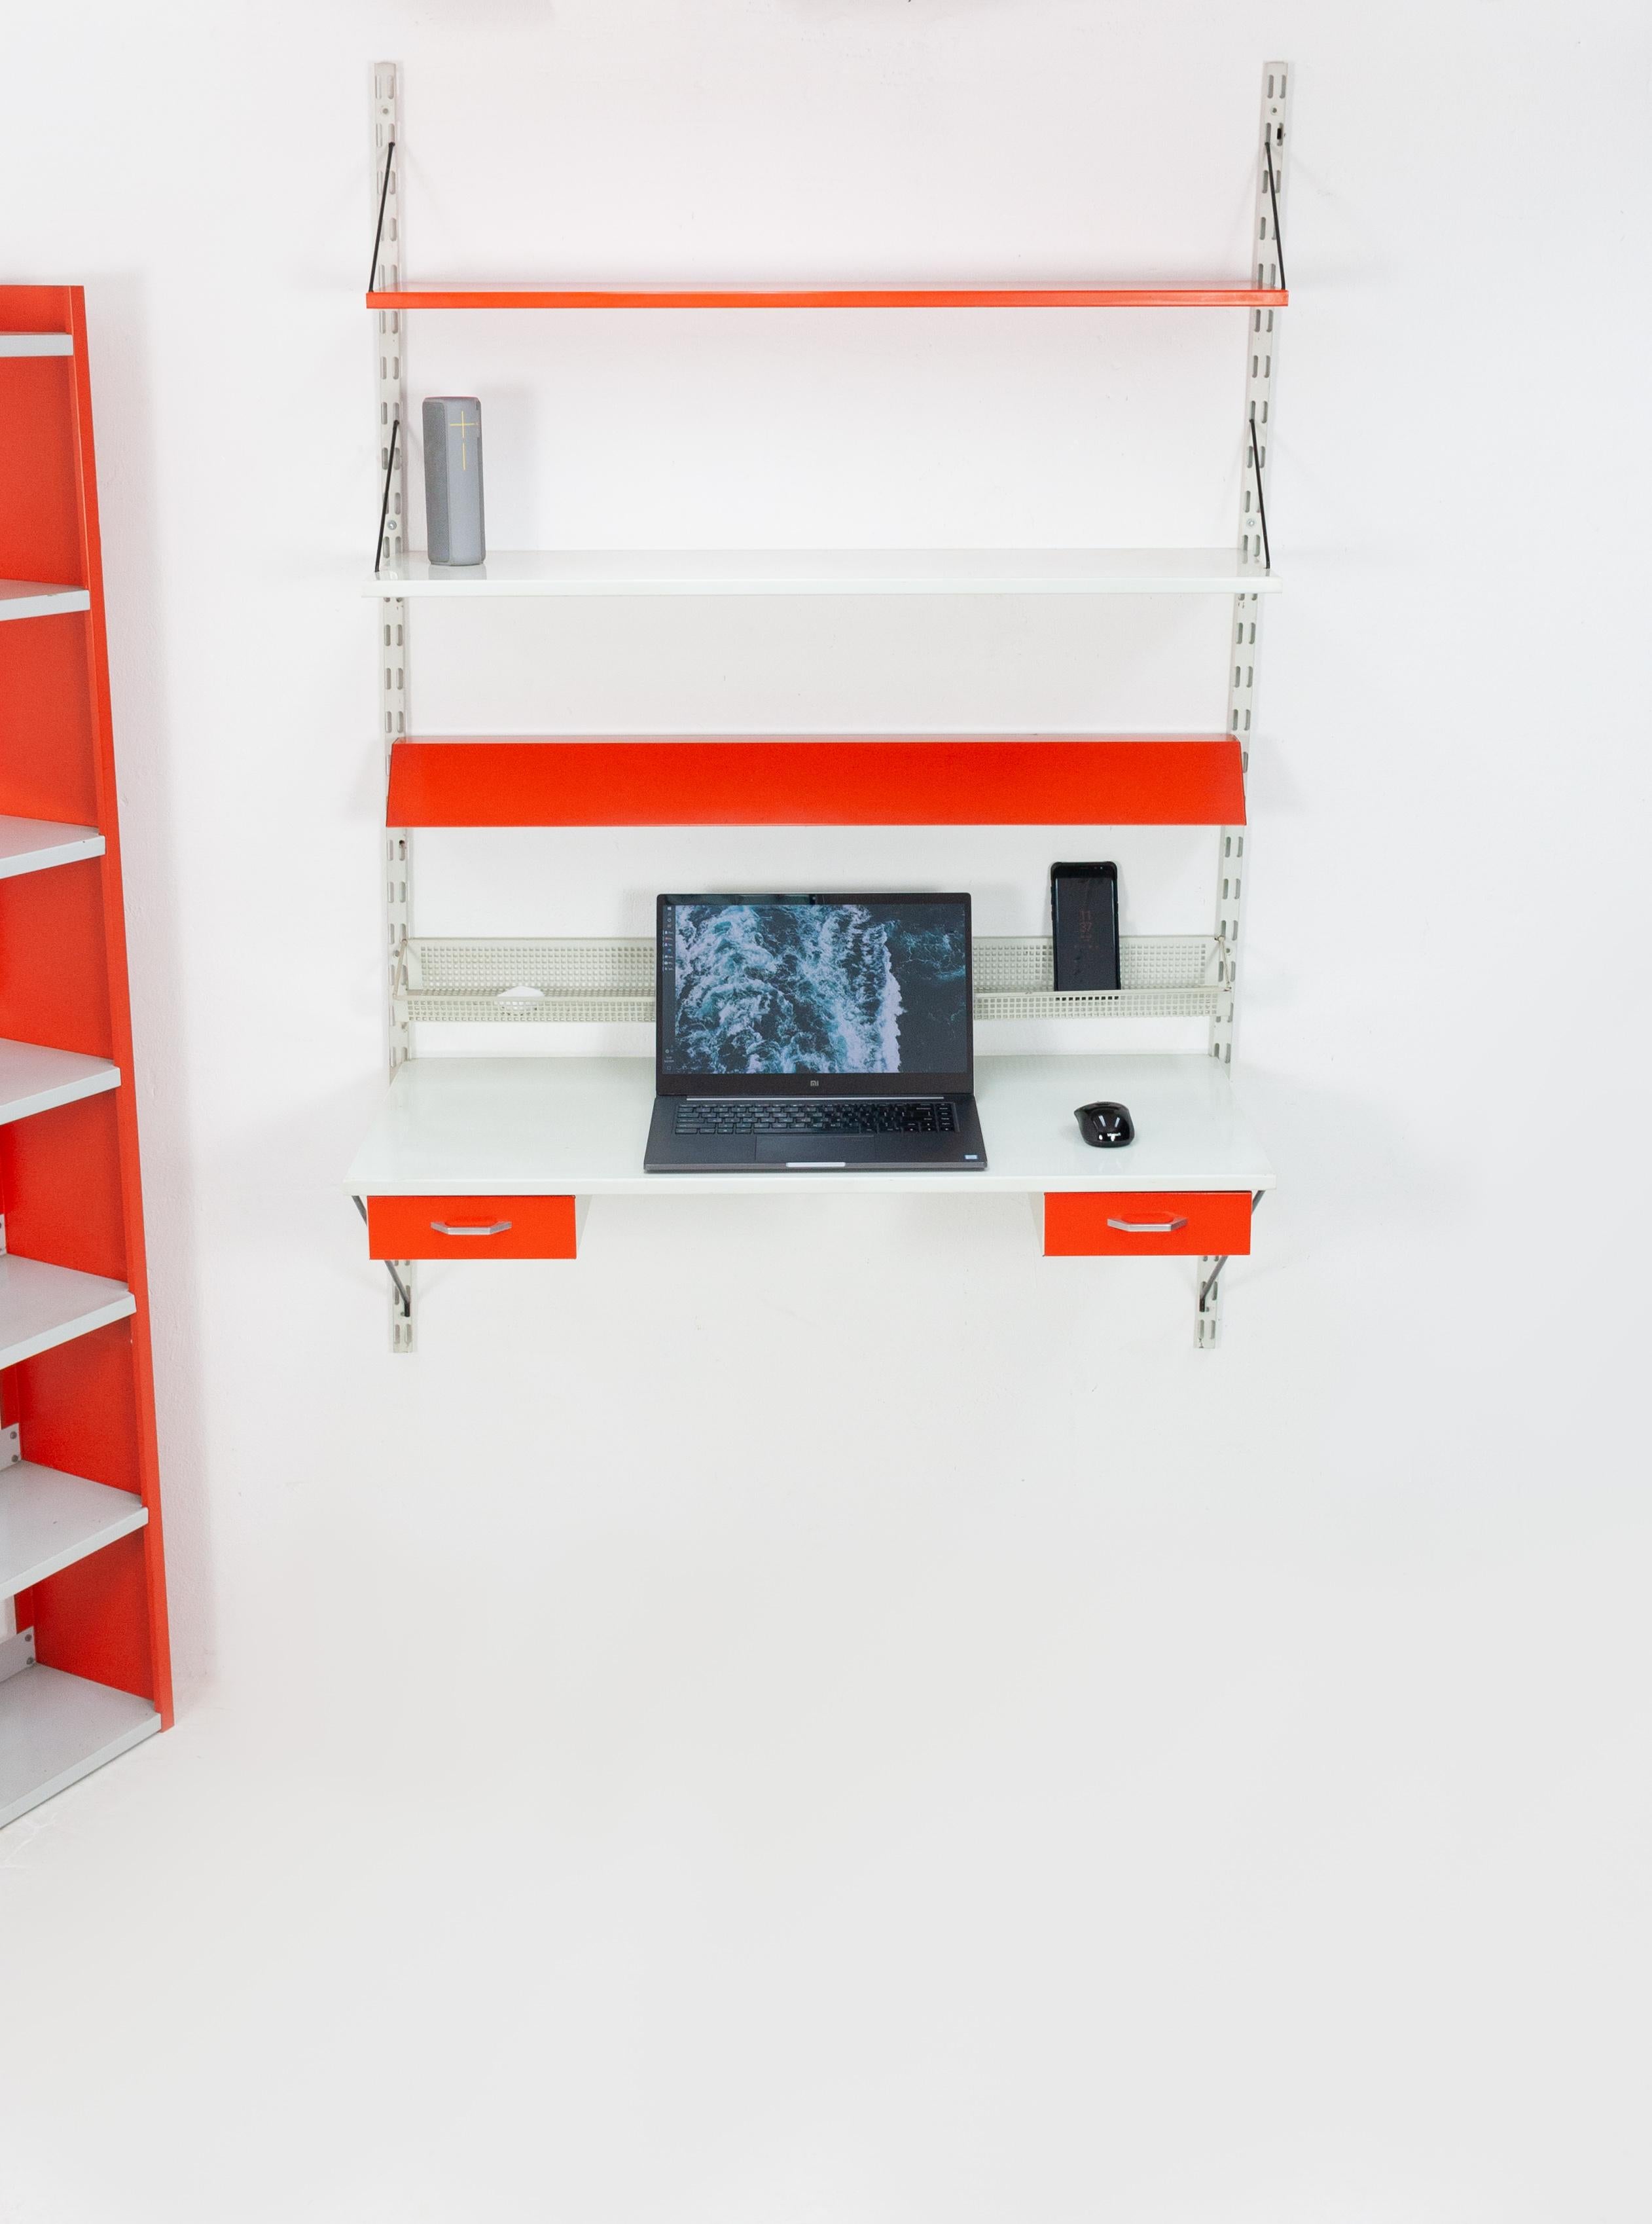 Pilastro modulair wall desk and bookcase. Matching set. Design Tjerk Rijenga for Pilastro, Holland, 1960s.
Orange with grey metal color. The desk contents two drawers. Comes with lighting, two e27 bulbs. And a perforated tray for all kinds of